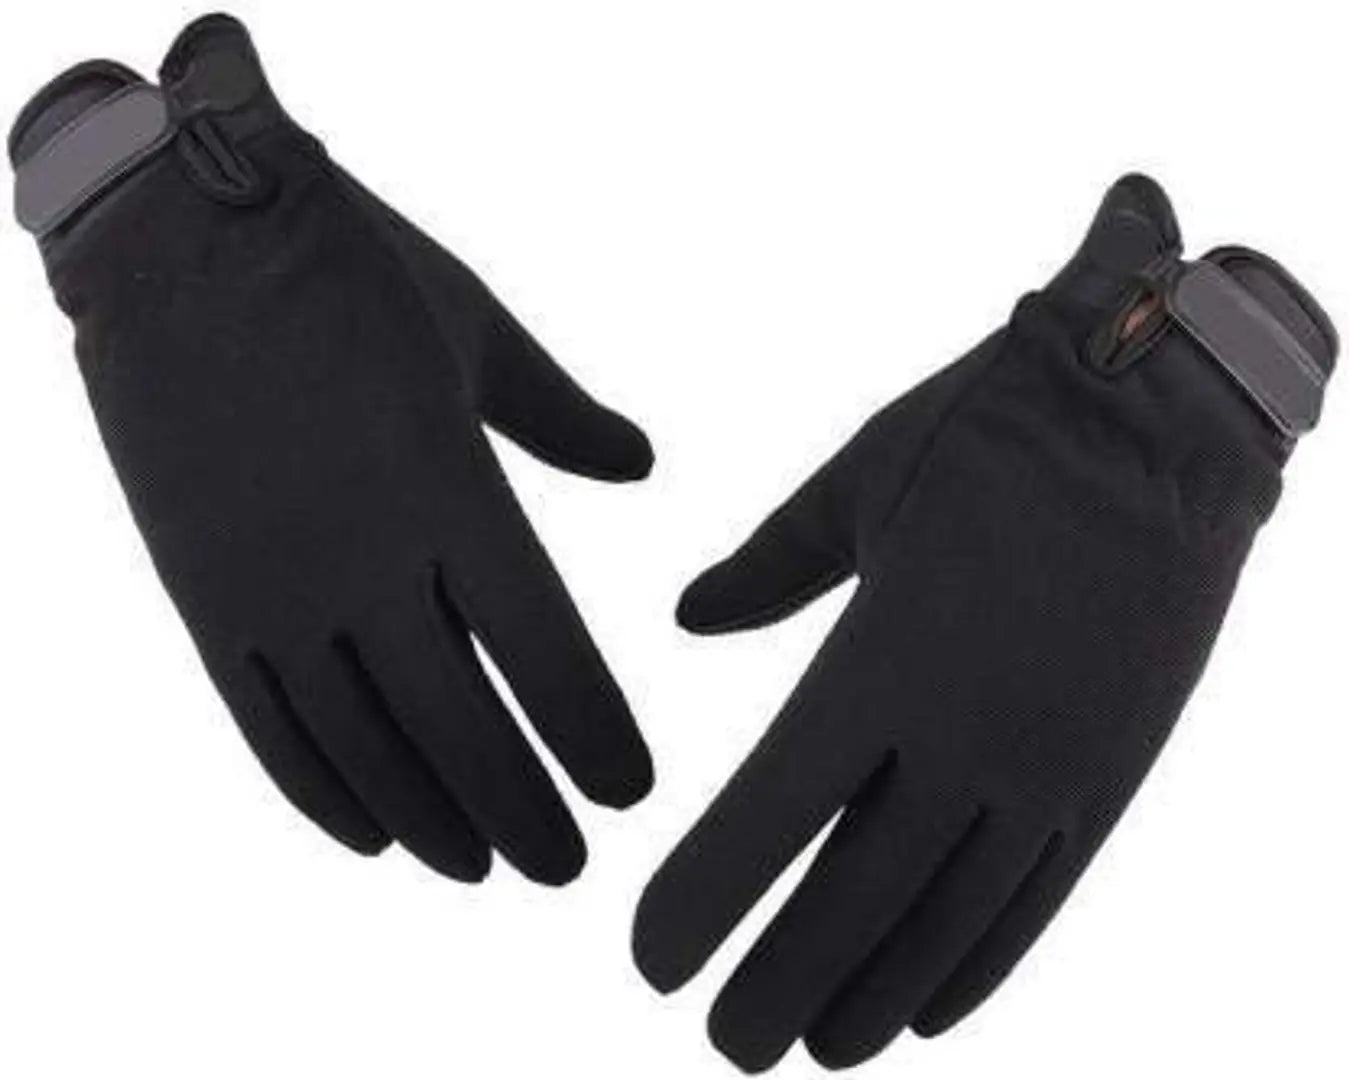 ZaySoo Anti Slip Riding Gloves Touch Screen Friendly Gloves Riding Gloves (Black)